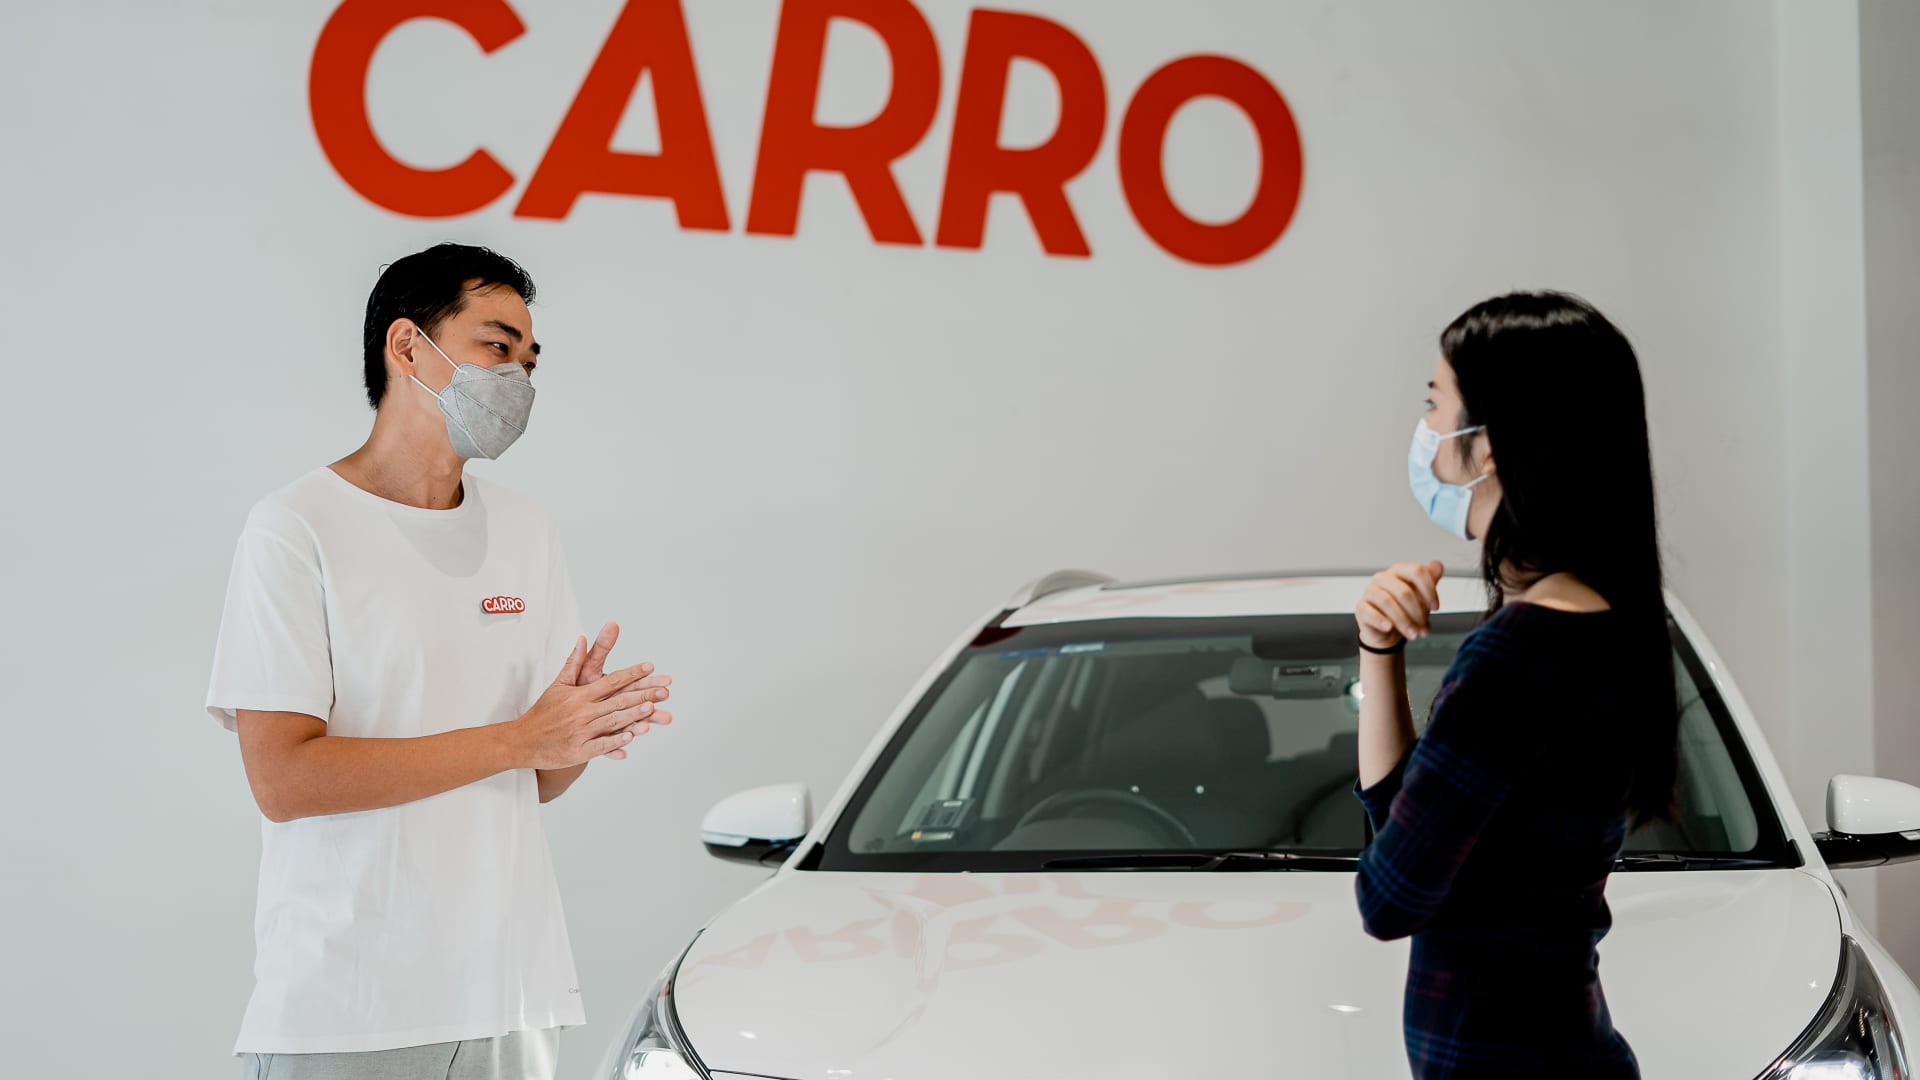 Carro says it is assisting with the transition to greener transport methods, by allowing buyers to trial new cars like electric vehicles.